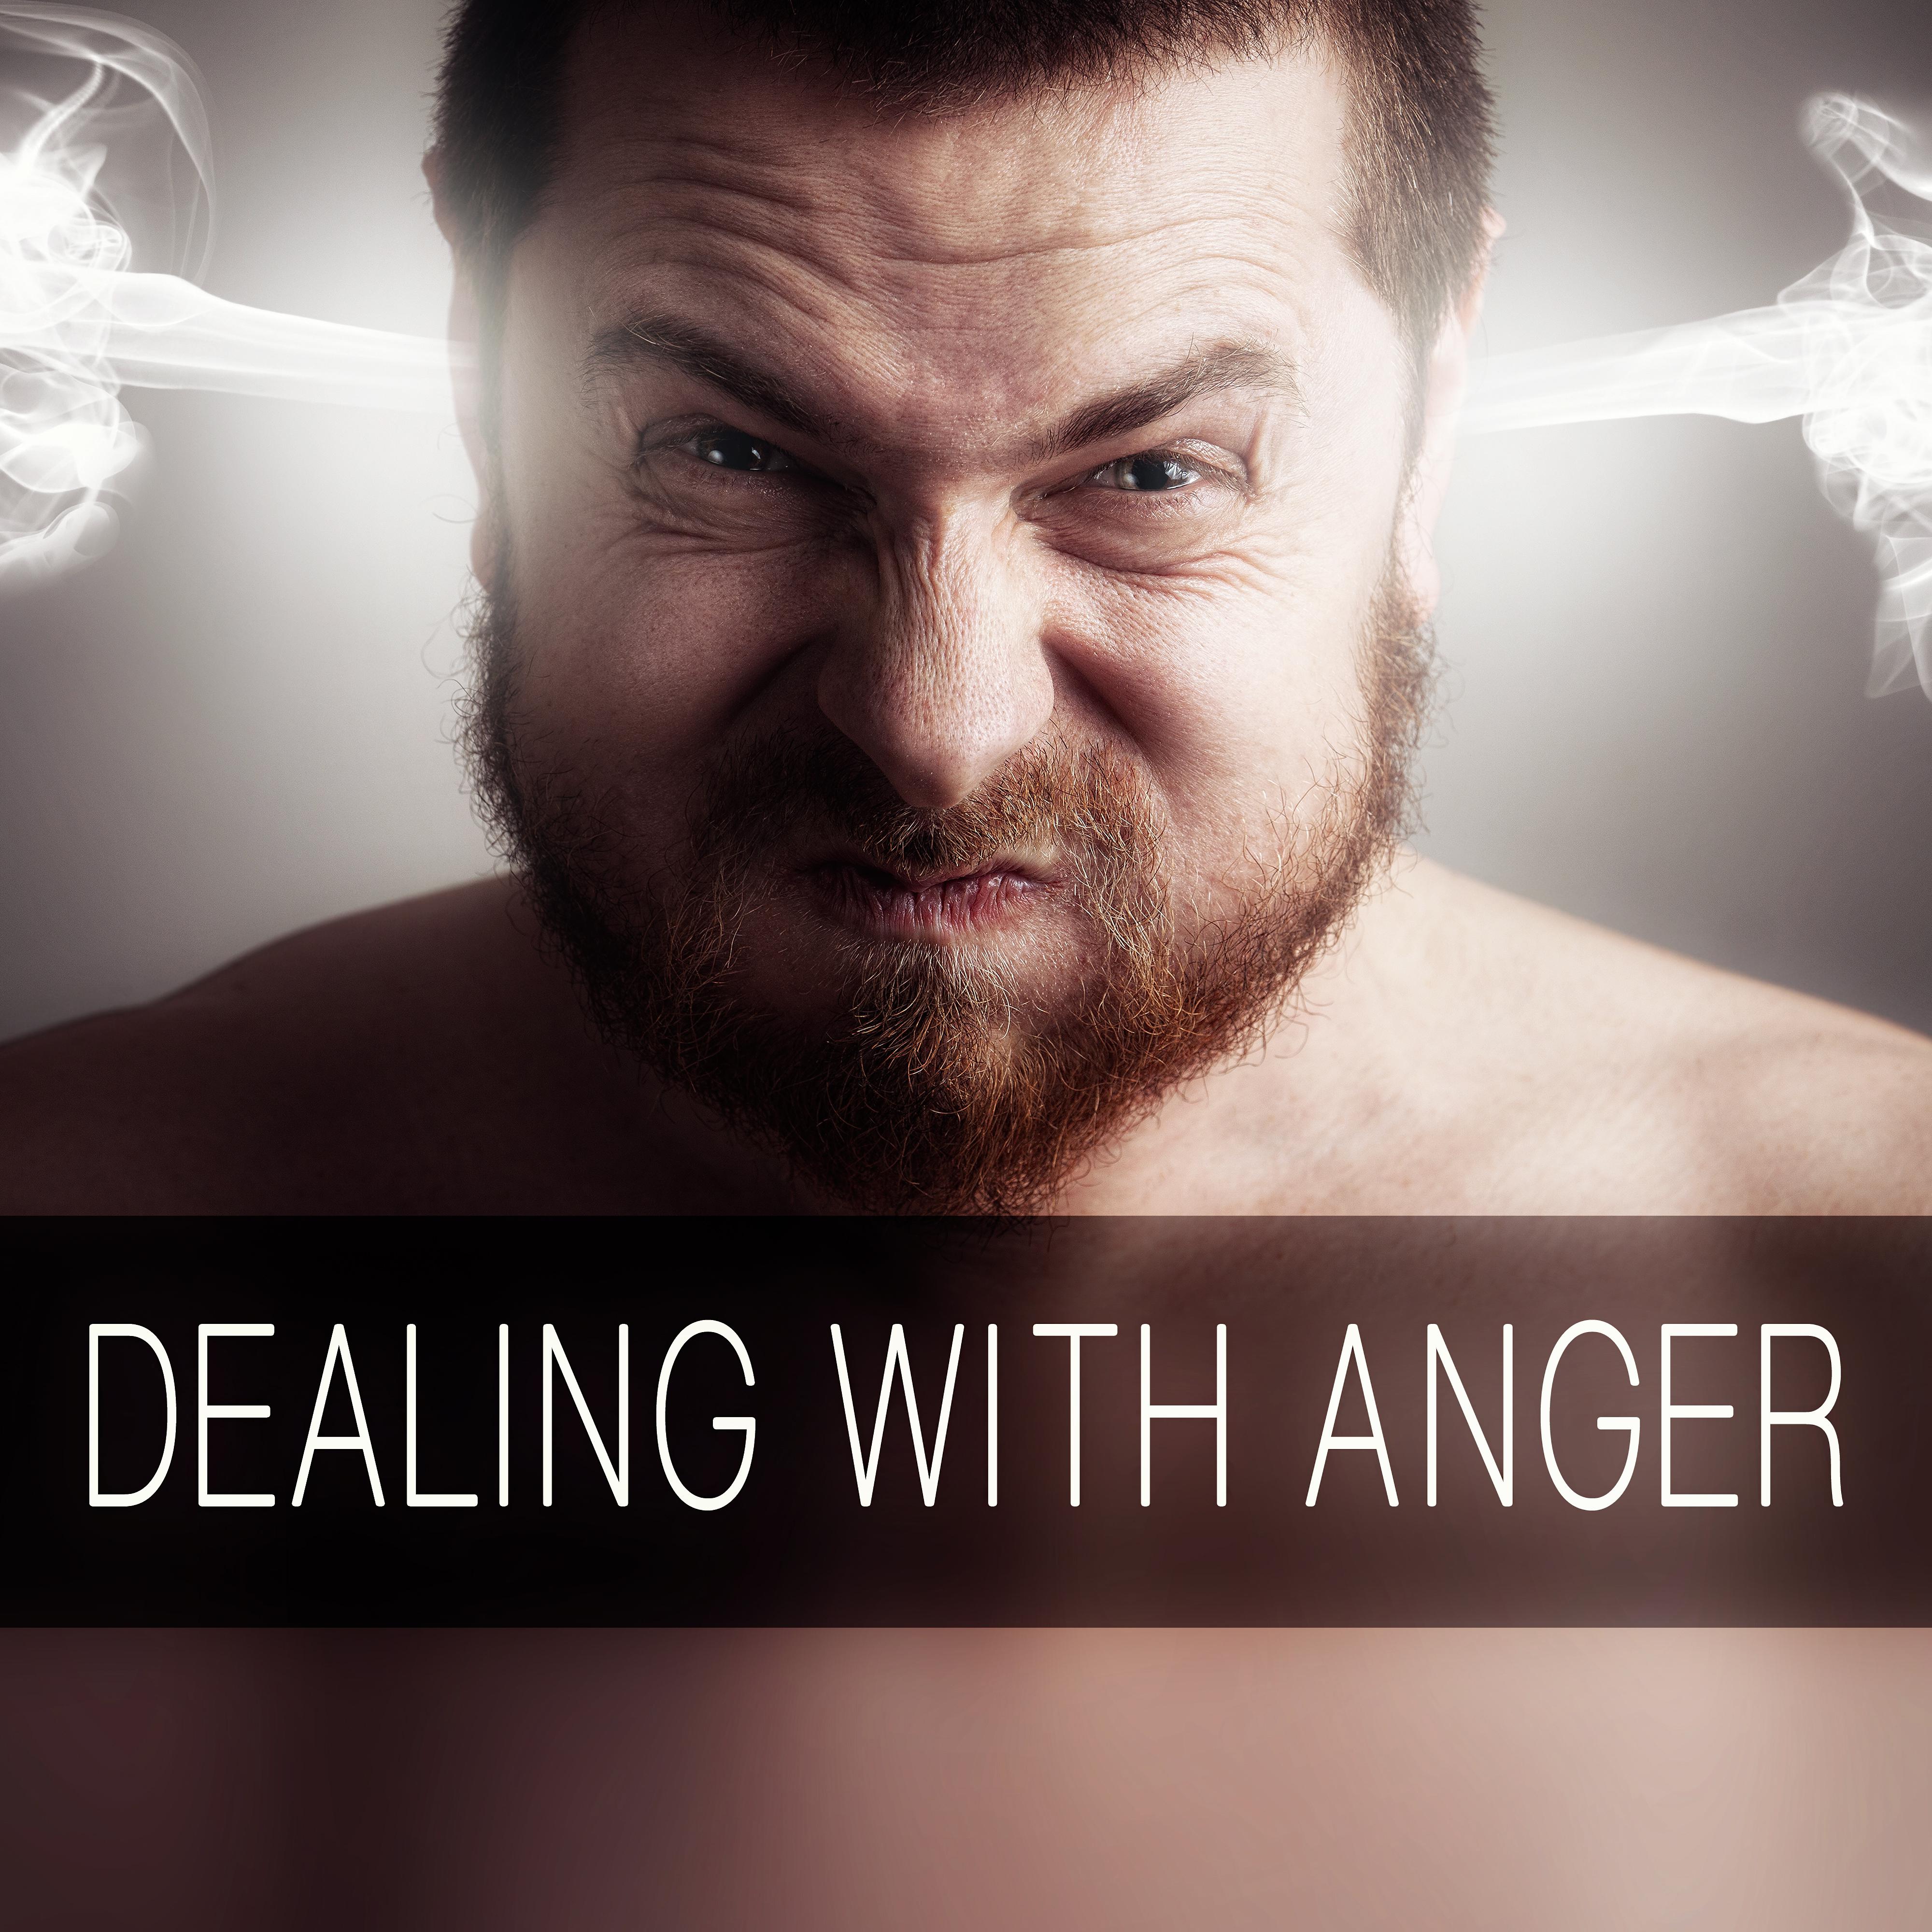 Reduce Your Anger